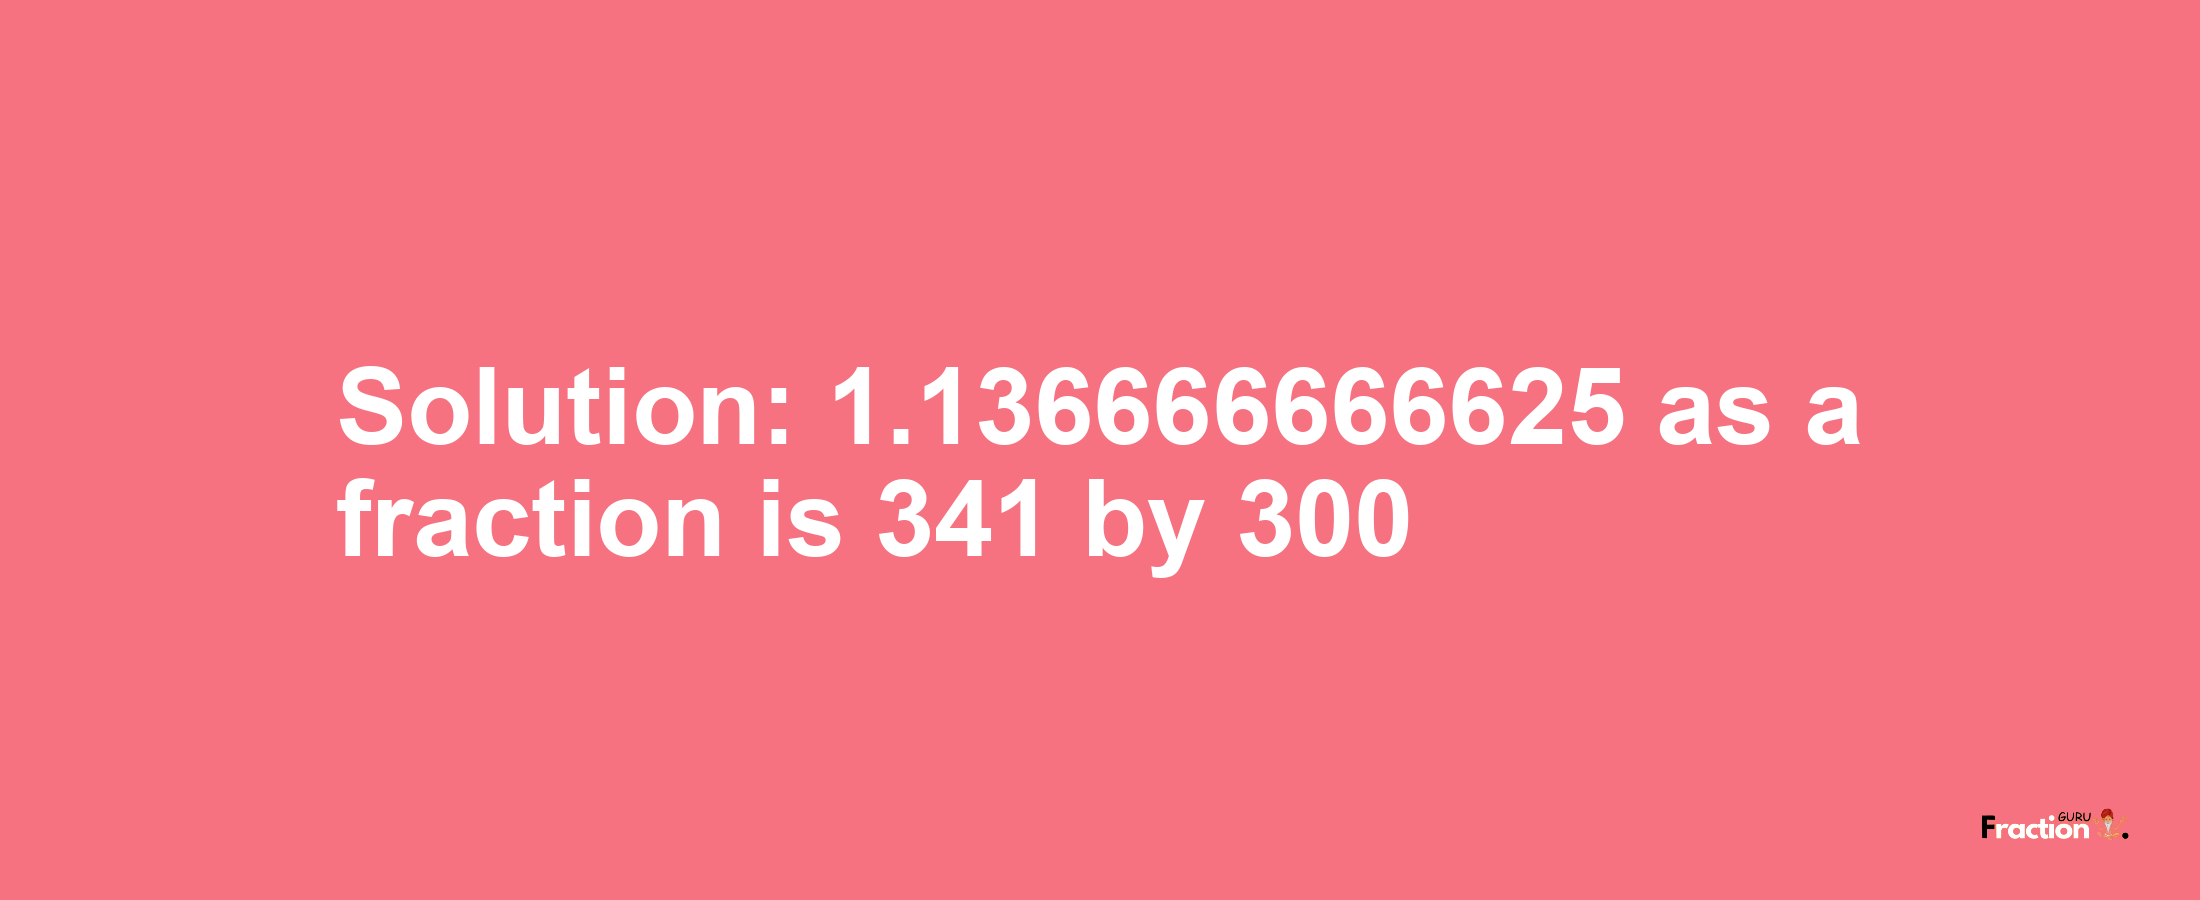 Solution:1.136666666625 as a fraction is 341/300